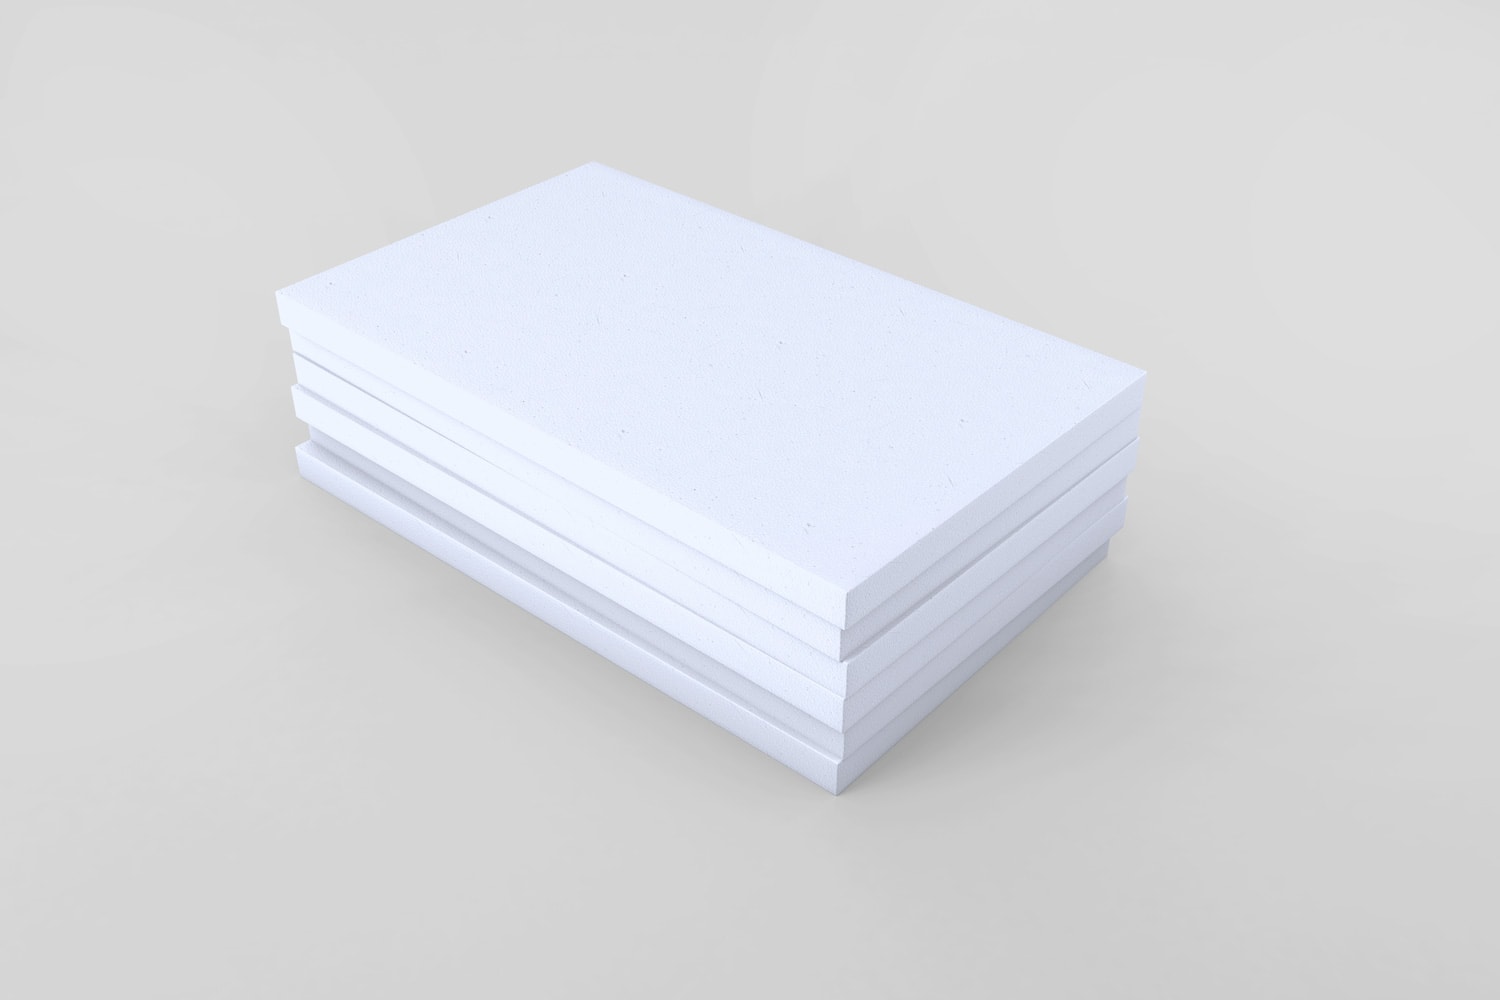 Stack of extruded polystyrene foam insulation material boards isolated on white background with clipping path